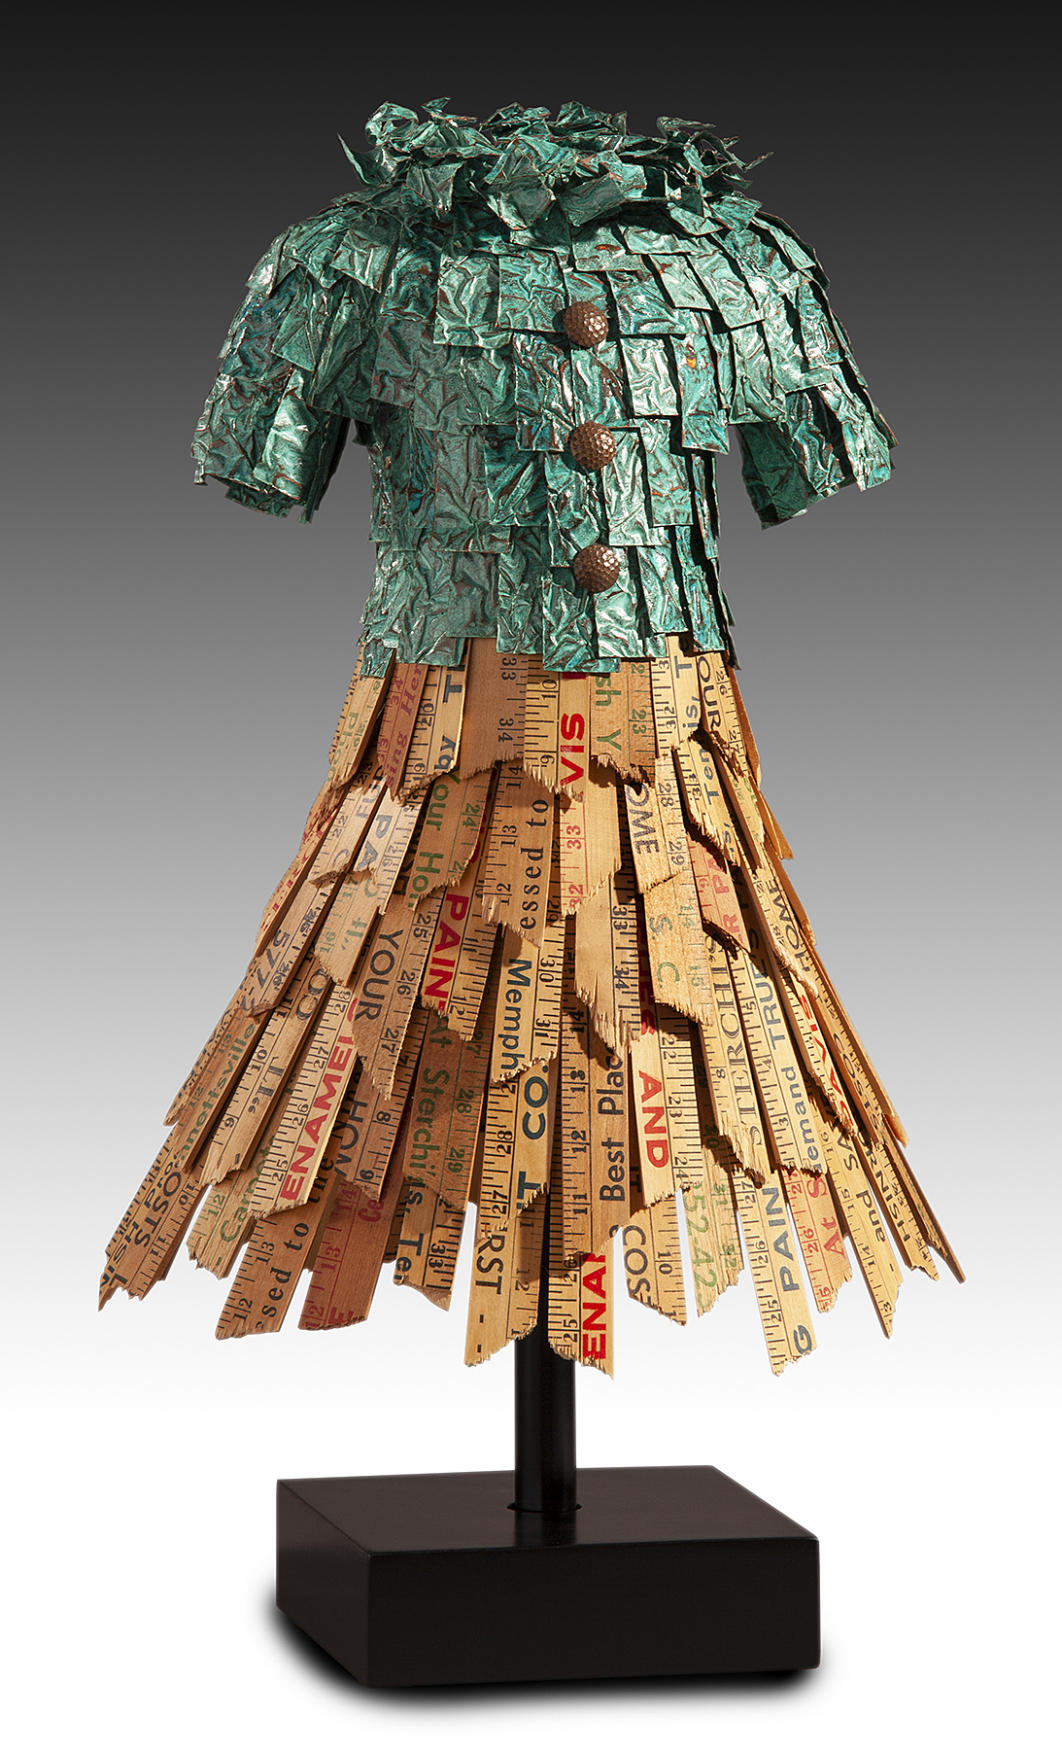 "Emma" - 
27" Tall - Vintage Yardsticks, Textured Copper with Patina